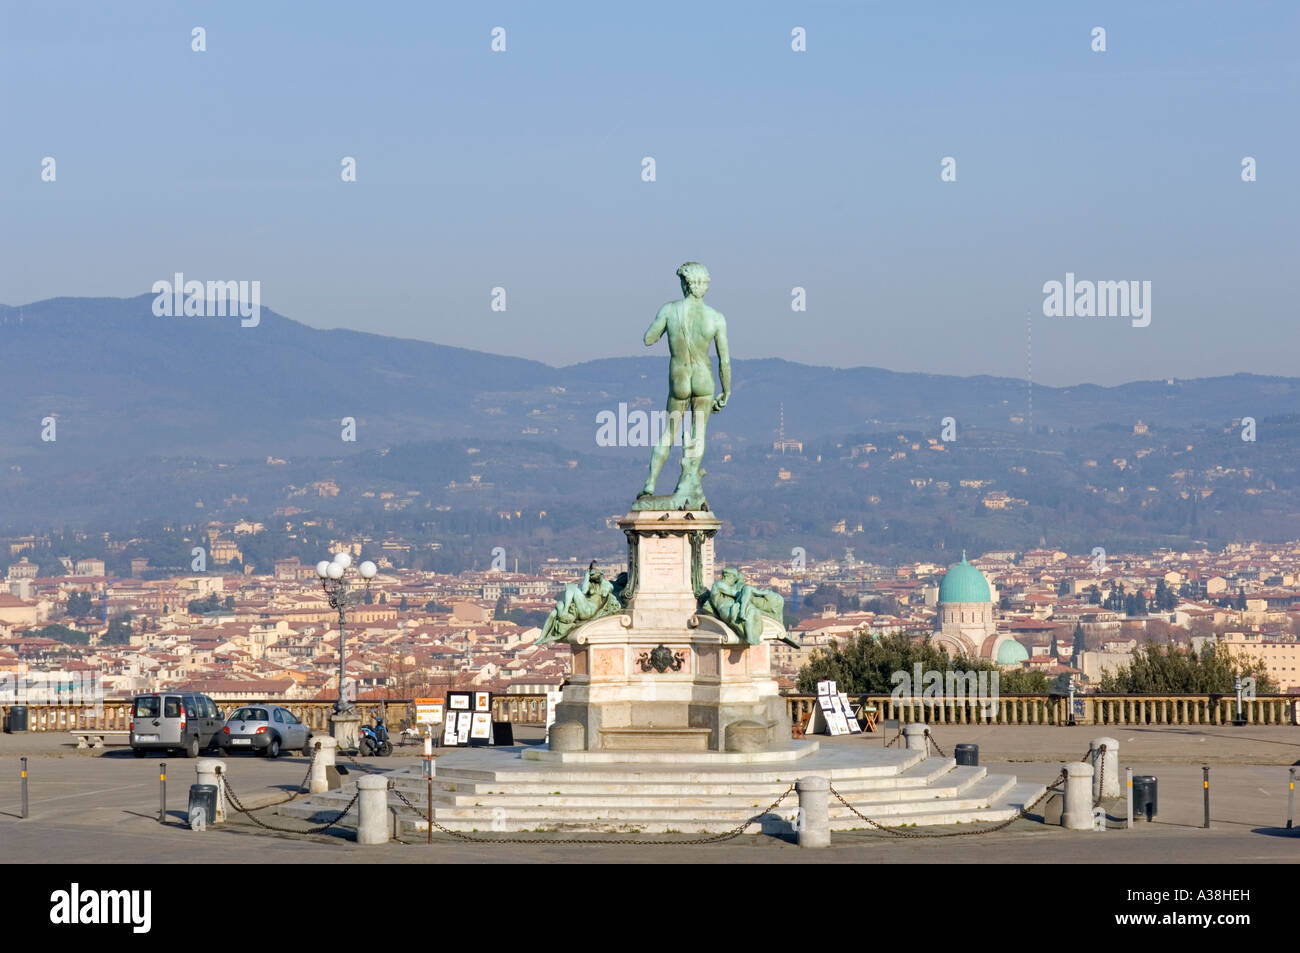 Michelangelo's statue of David (copy) that stands in the middle of the Piazzale Michelangelo overlooking Florence. Stock Photo